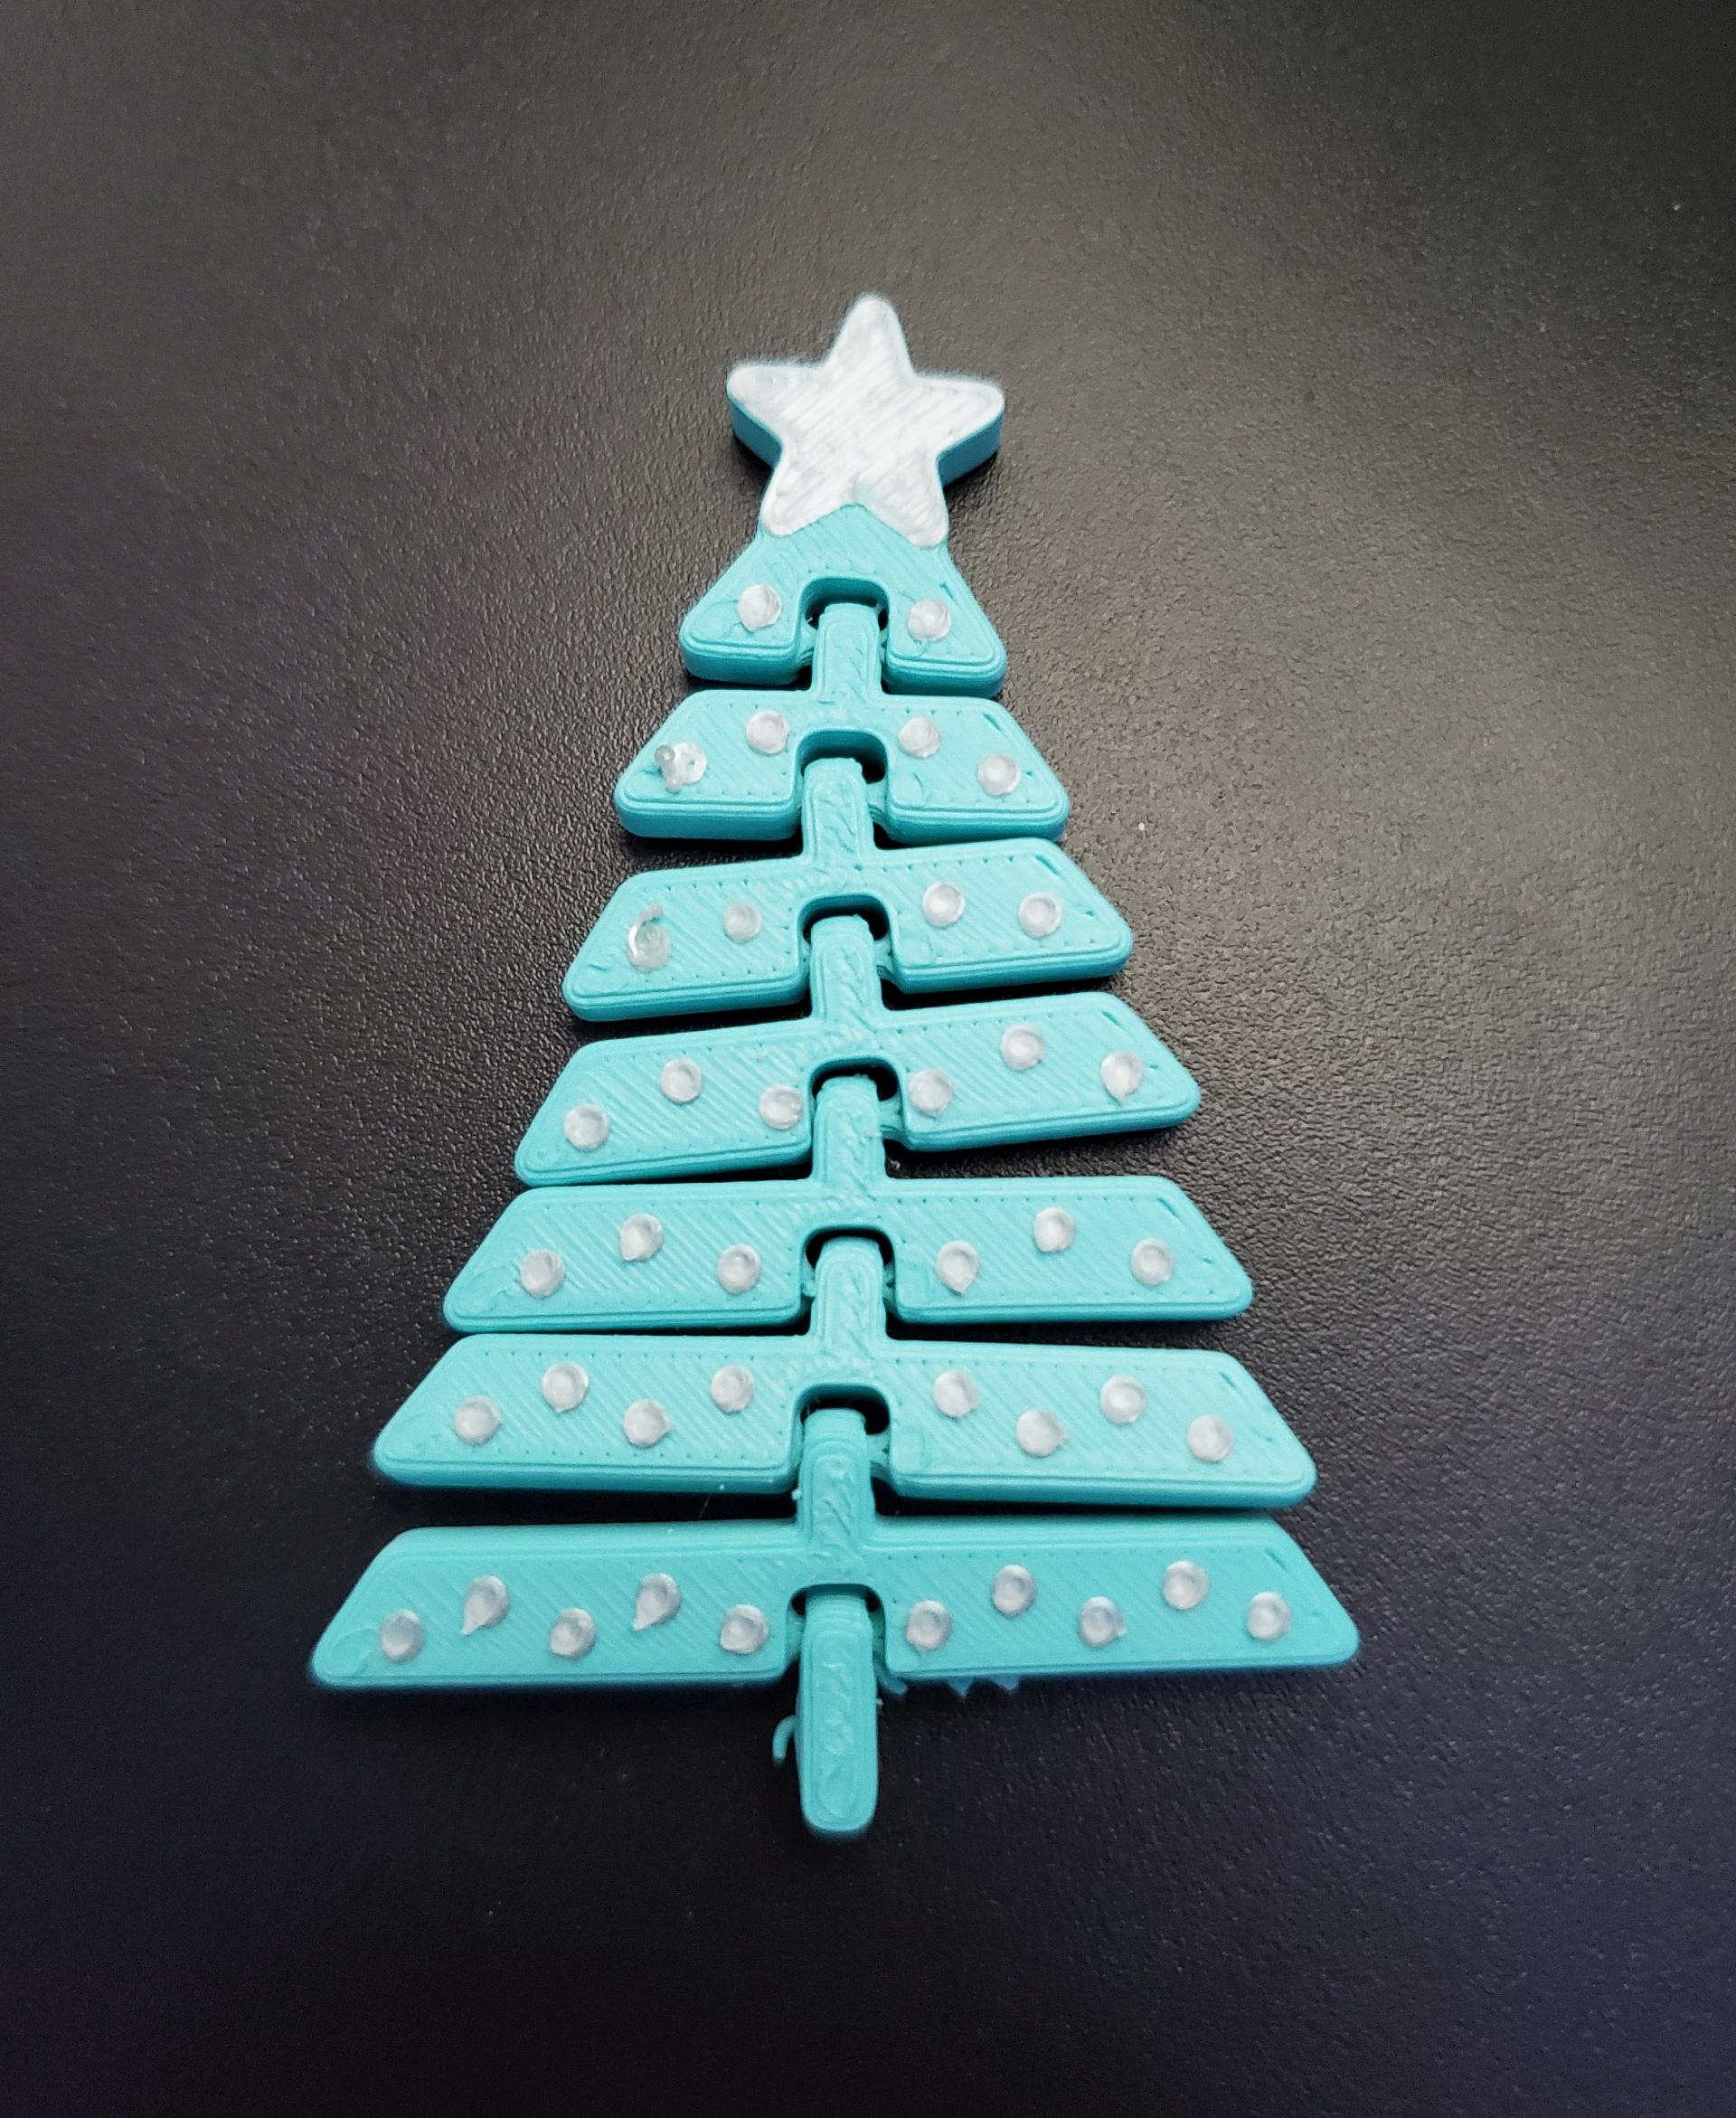 Articulated Christmas Tree with Star and Ornaments - Print in place fidget toys - 3mf - polyterra arctic teal - 3d model